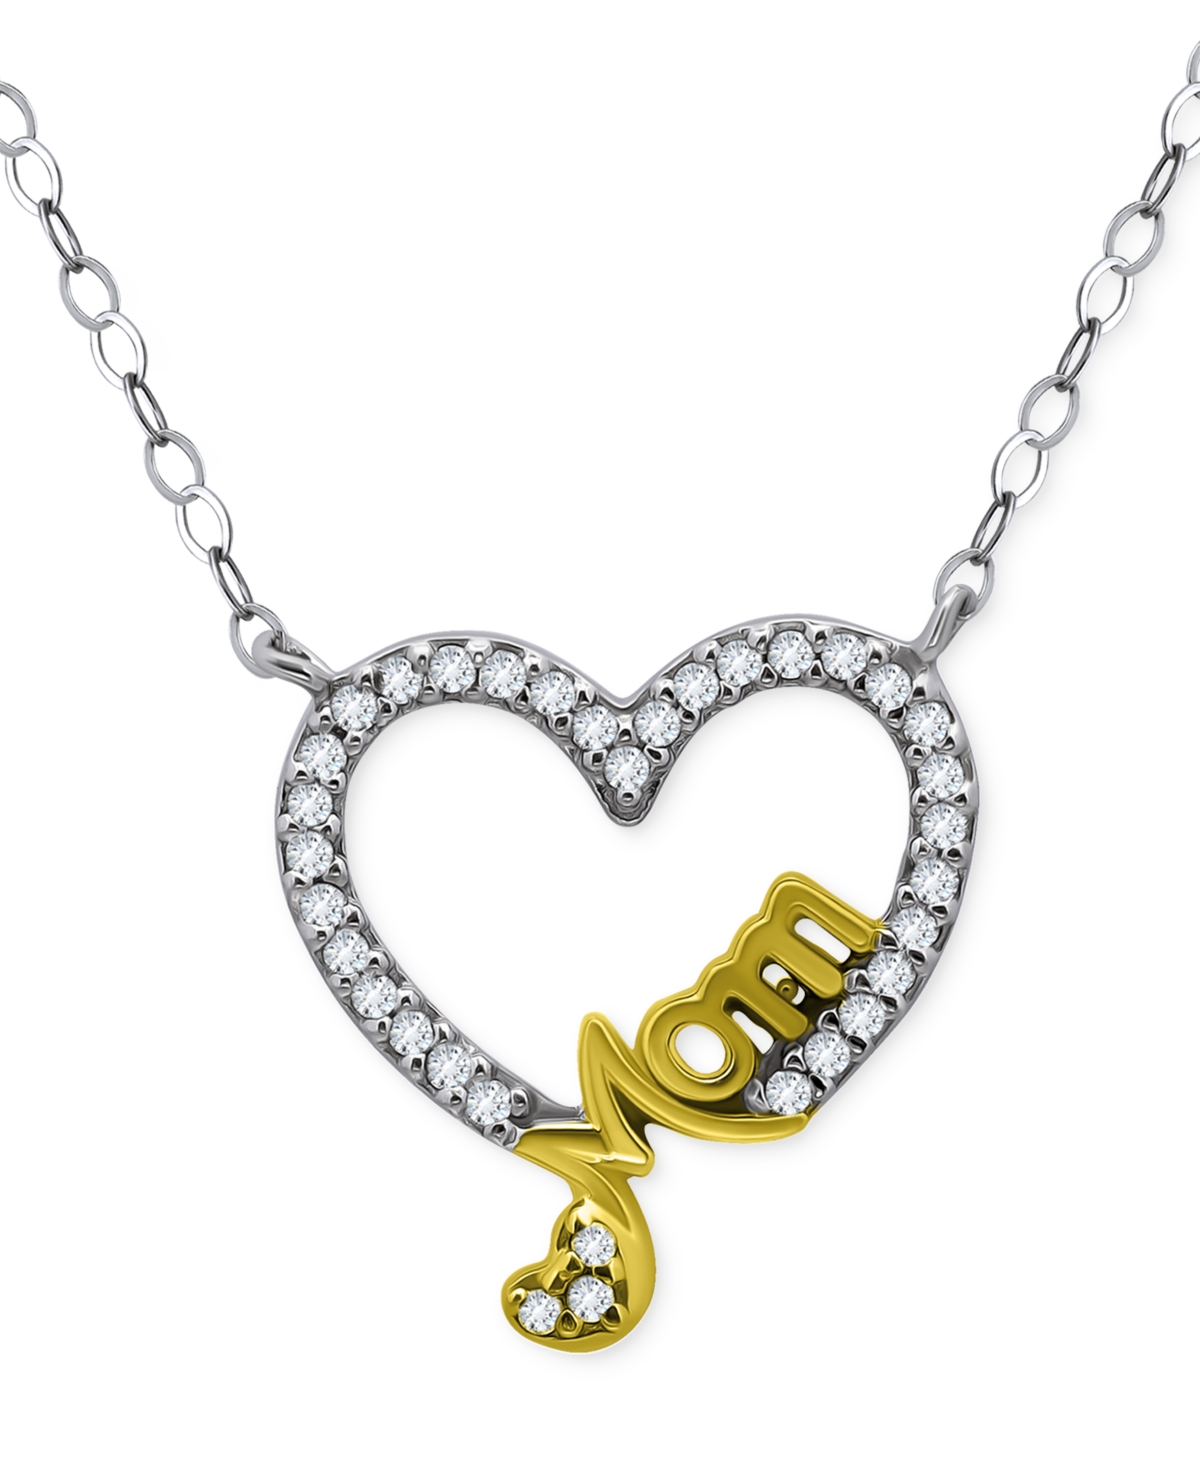 Giani Bernini Cubic Zirconia Mom Heart Pendant Necklace In Sterling Silver & 18k Gold-plate, 16" + 2" Extender, Cr In Two Tone